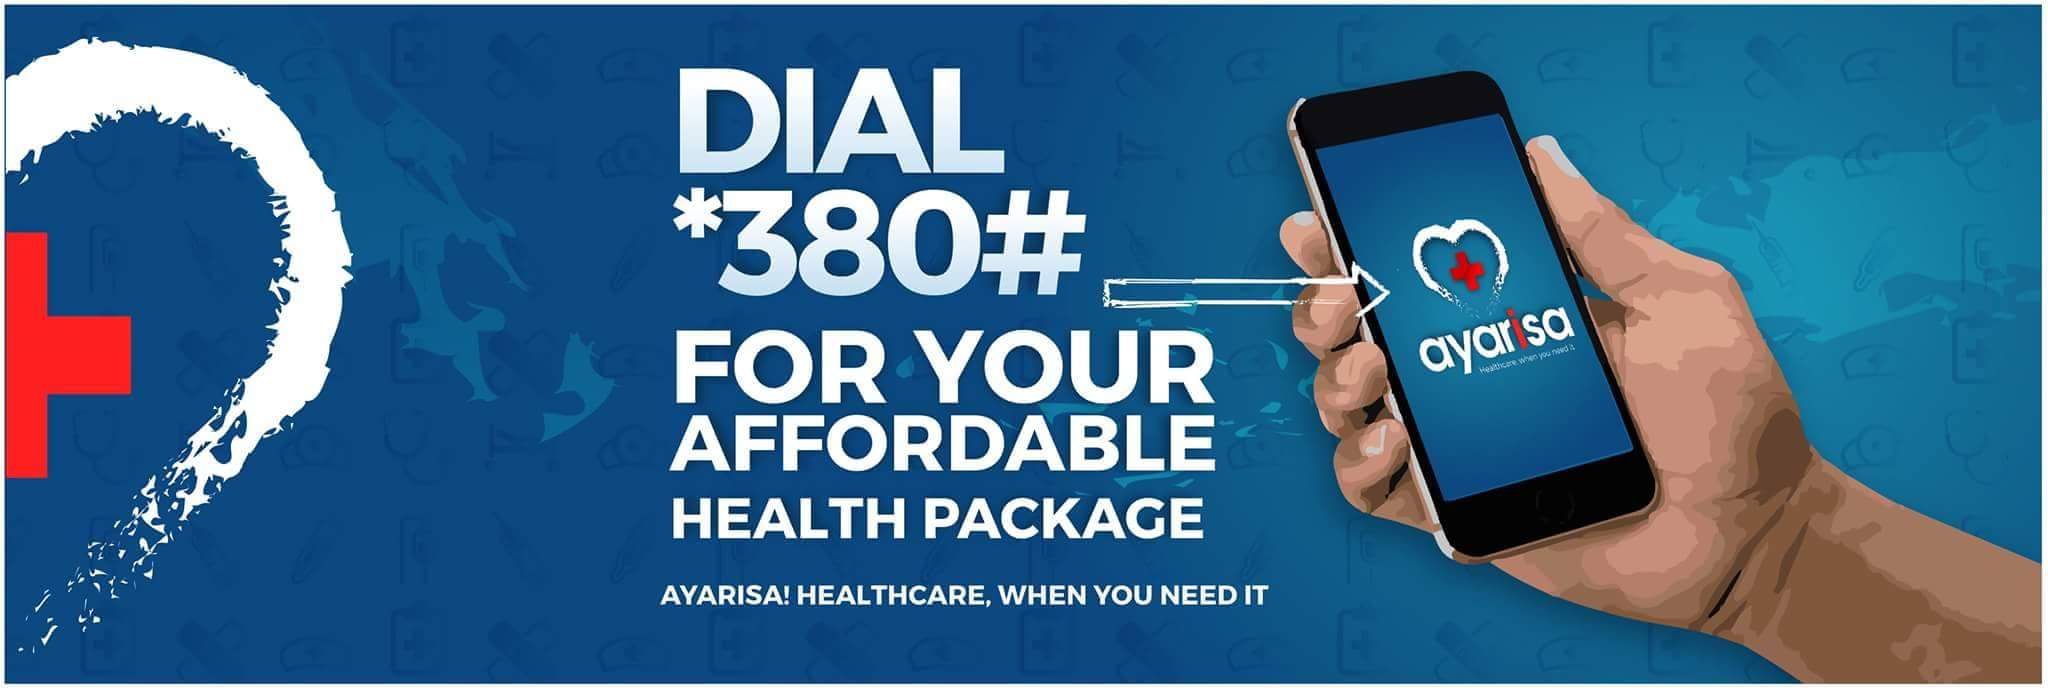 KAISER LAUNCHES AYARISA “Healthcare, when you need it”